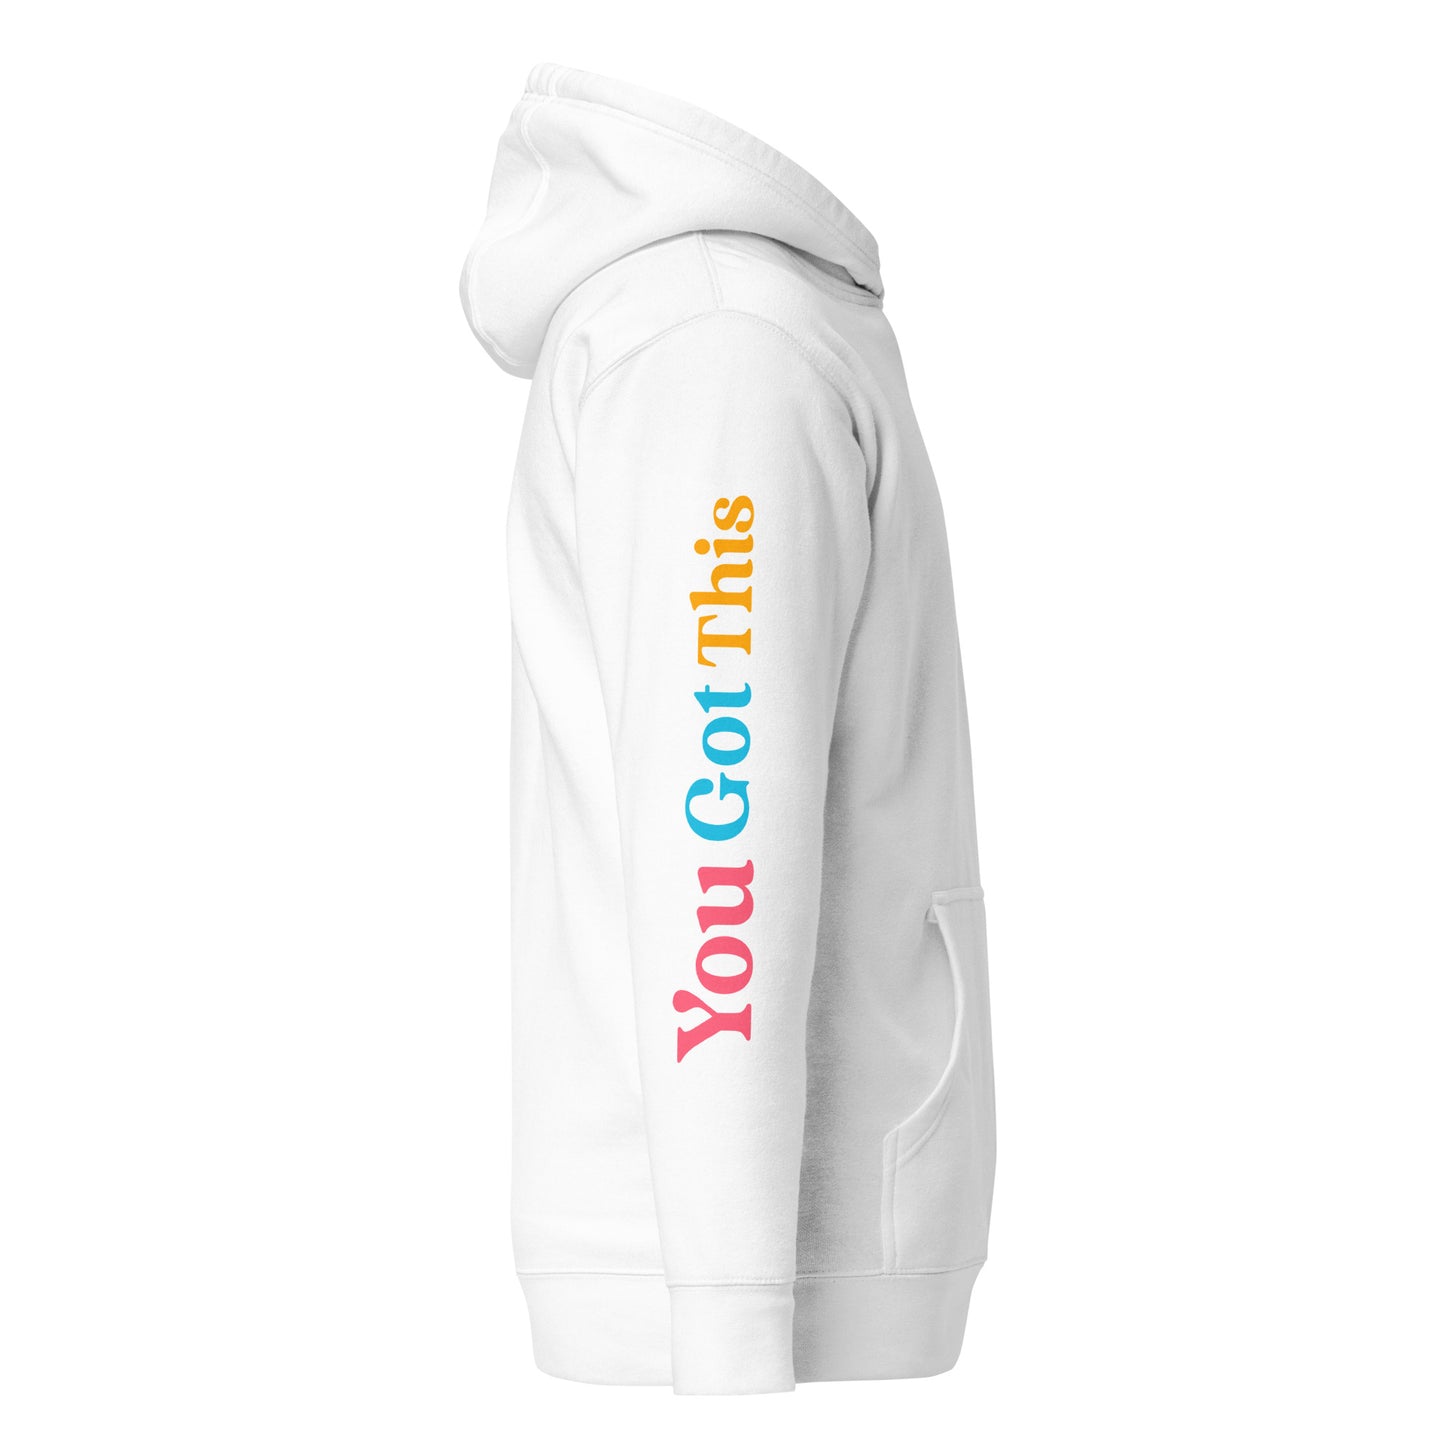 Your Deserve the World Unisex Hoodie